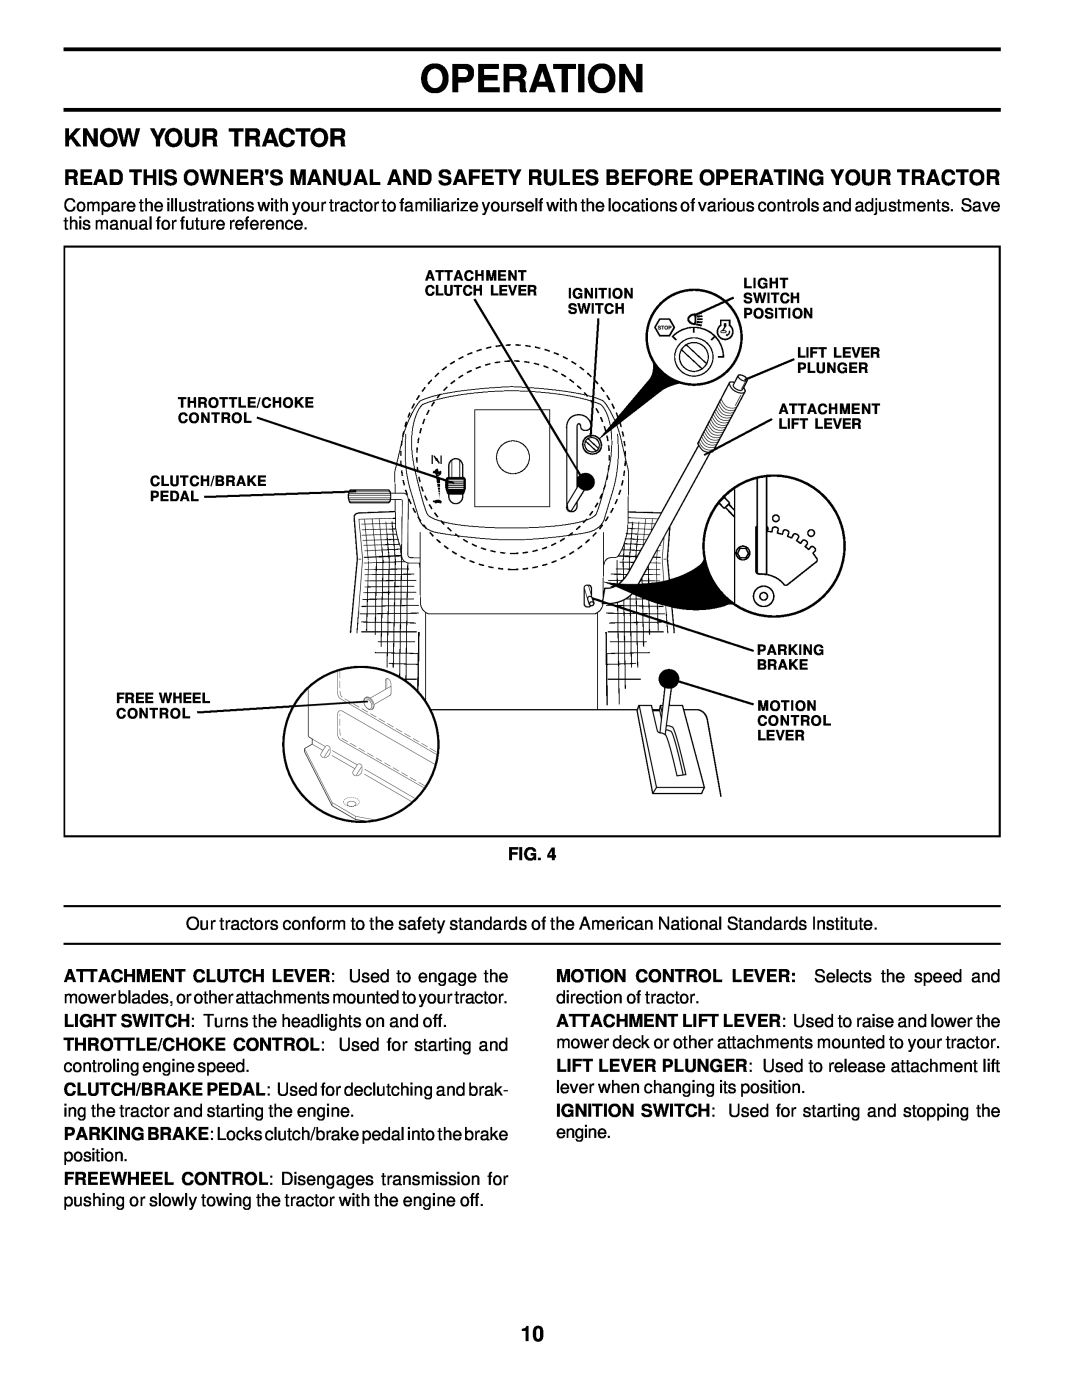 Poulan 176085 owner manual Know Your Tractor, Operation, MOTION CONTROL LEVER Selects the speed and direction of tractor 